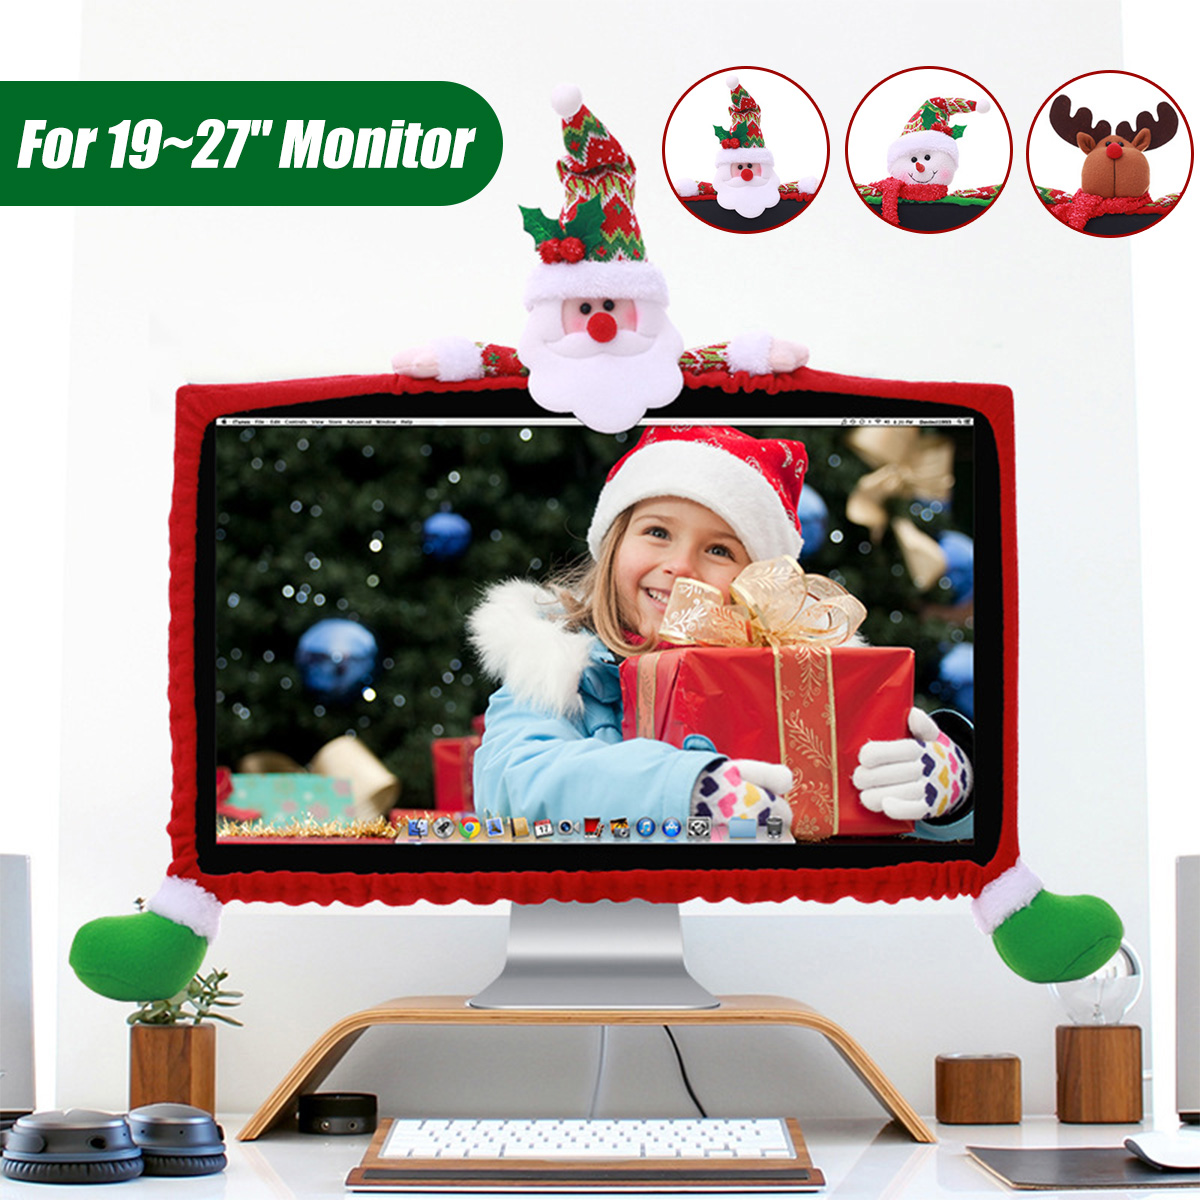 3-Style-Christmas-Computer-Laptop-LCD-Screen-Monitor-Decor-Cover-Suit-19-27quot-1376081-1